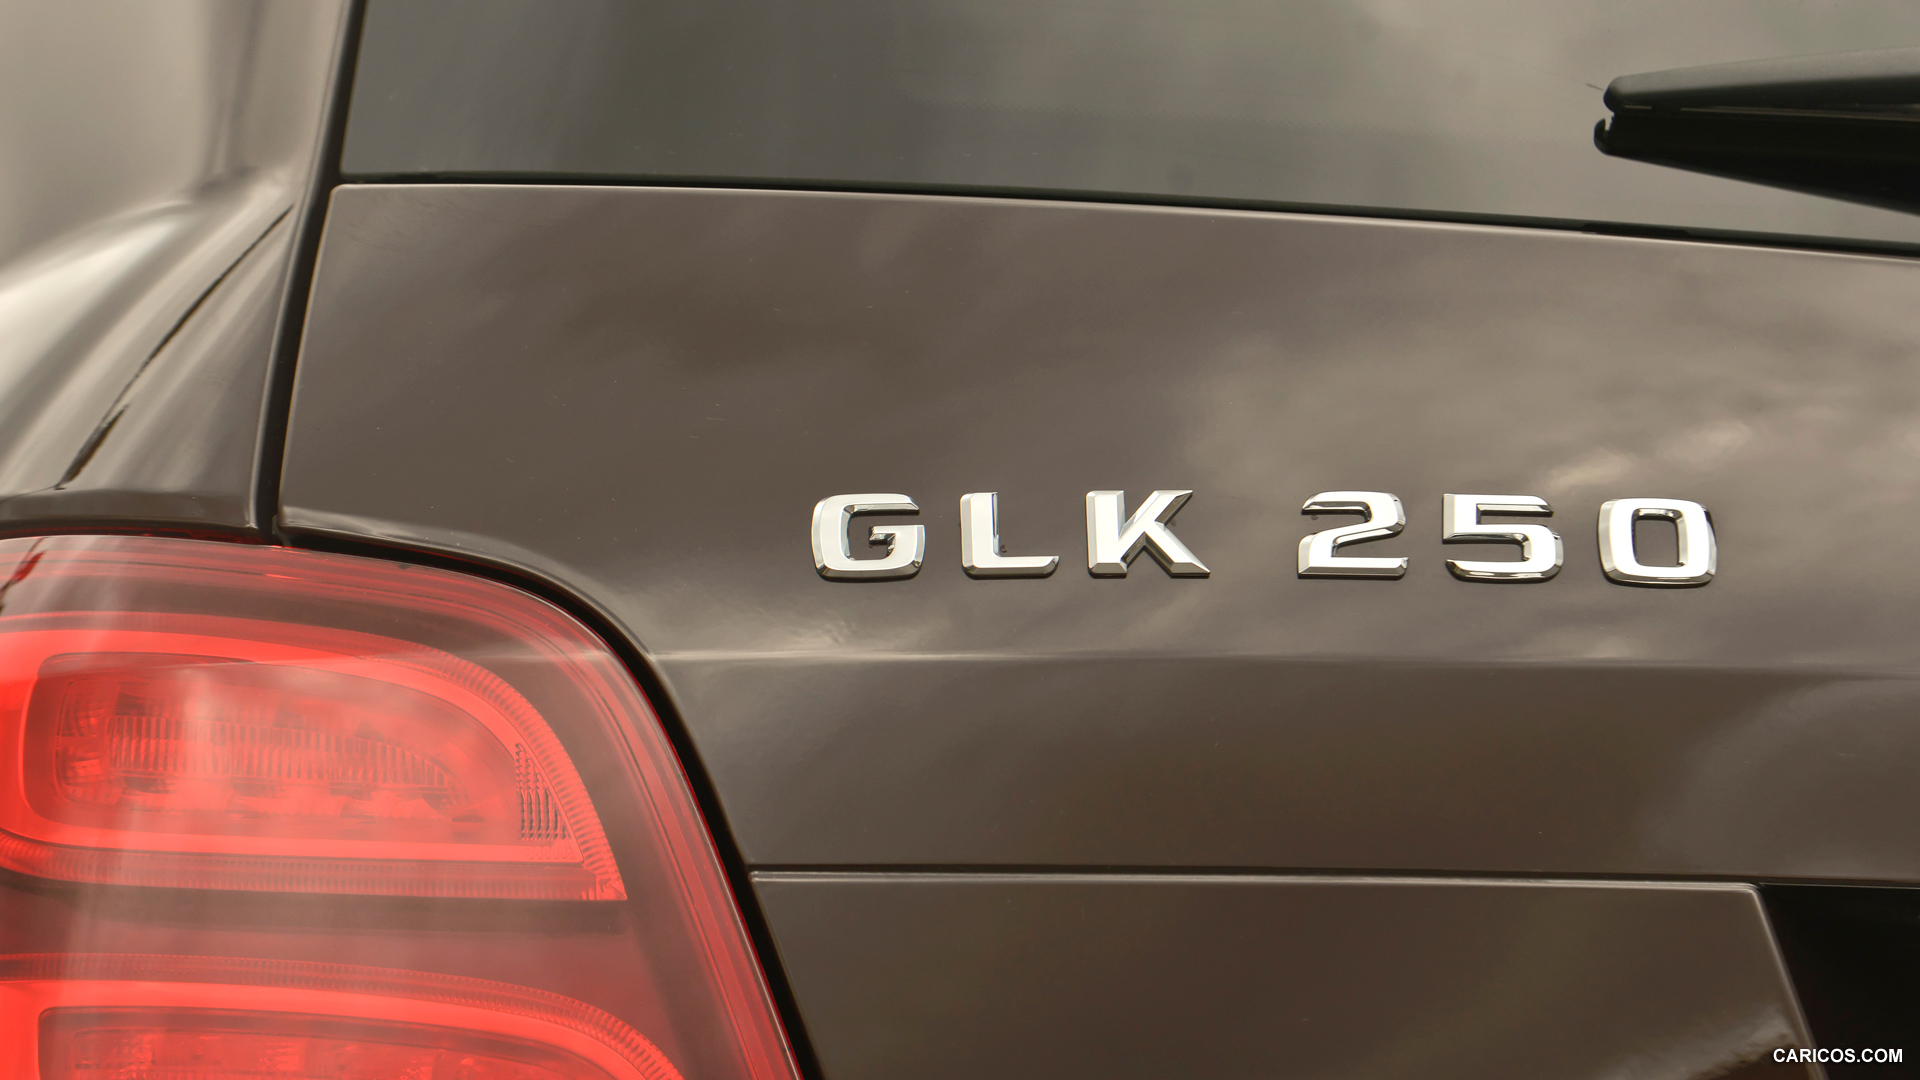 2013 Mercedes-Benz GLK250 BlueTEC (Fully Equipped) - Badge, #76 of 109